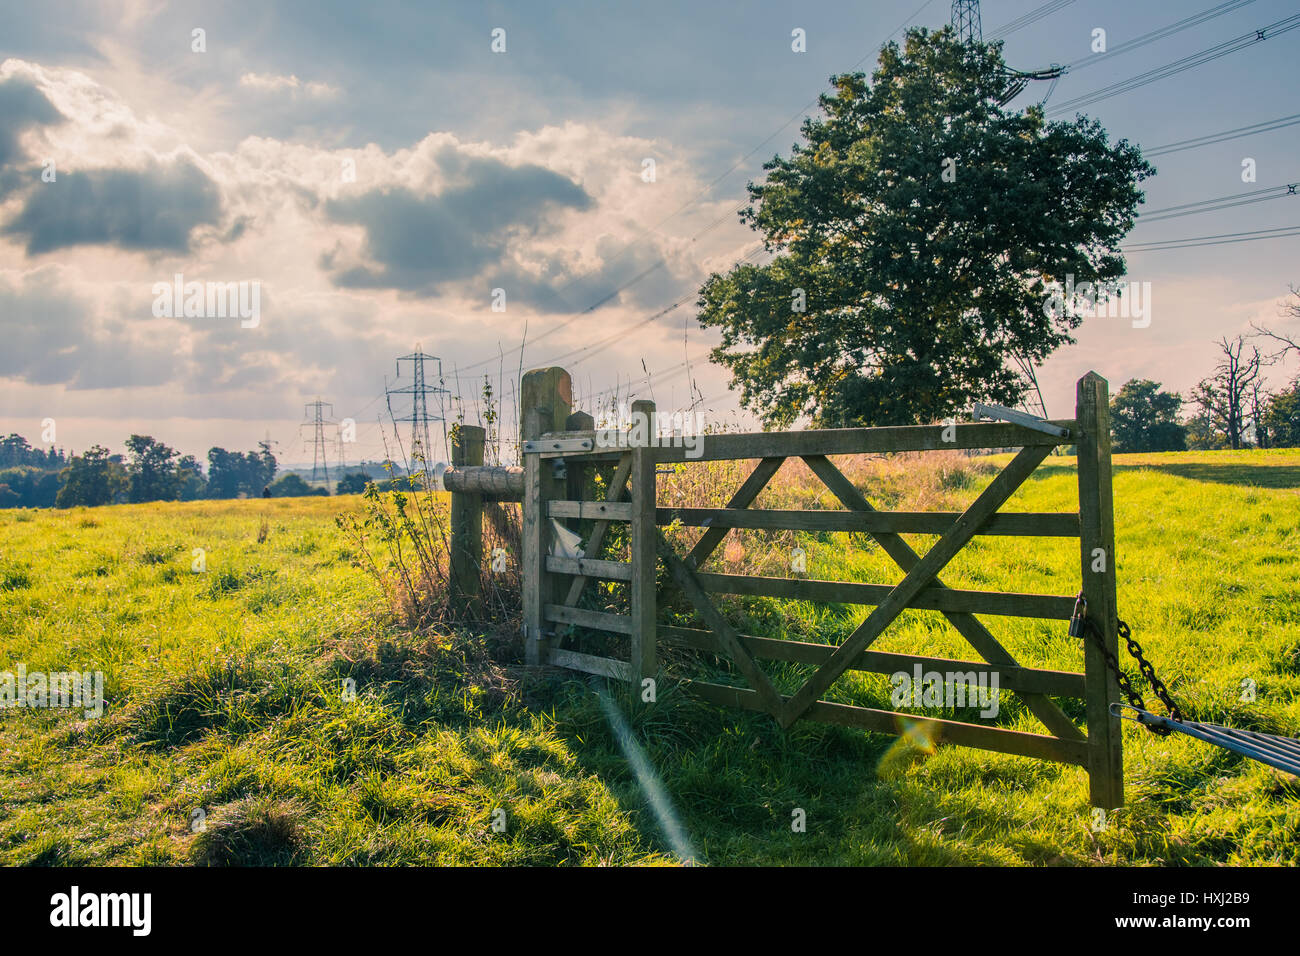 Gate in English countryside Stock Photo